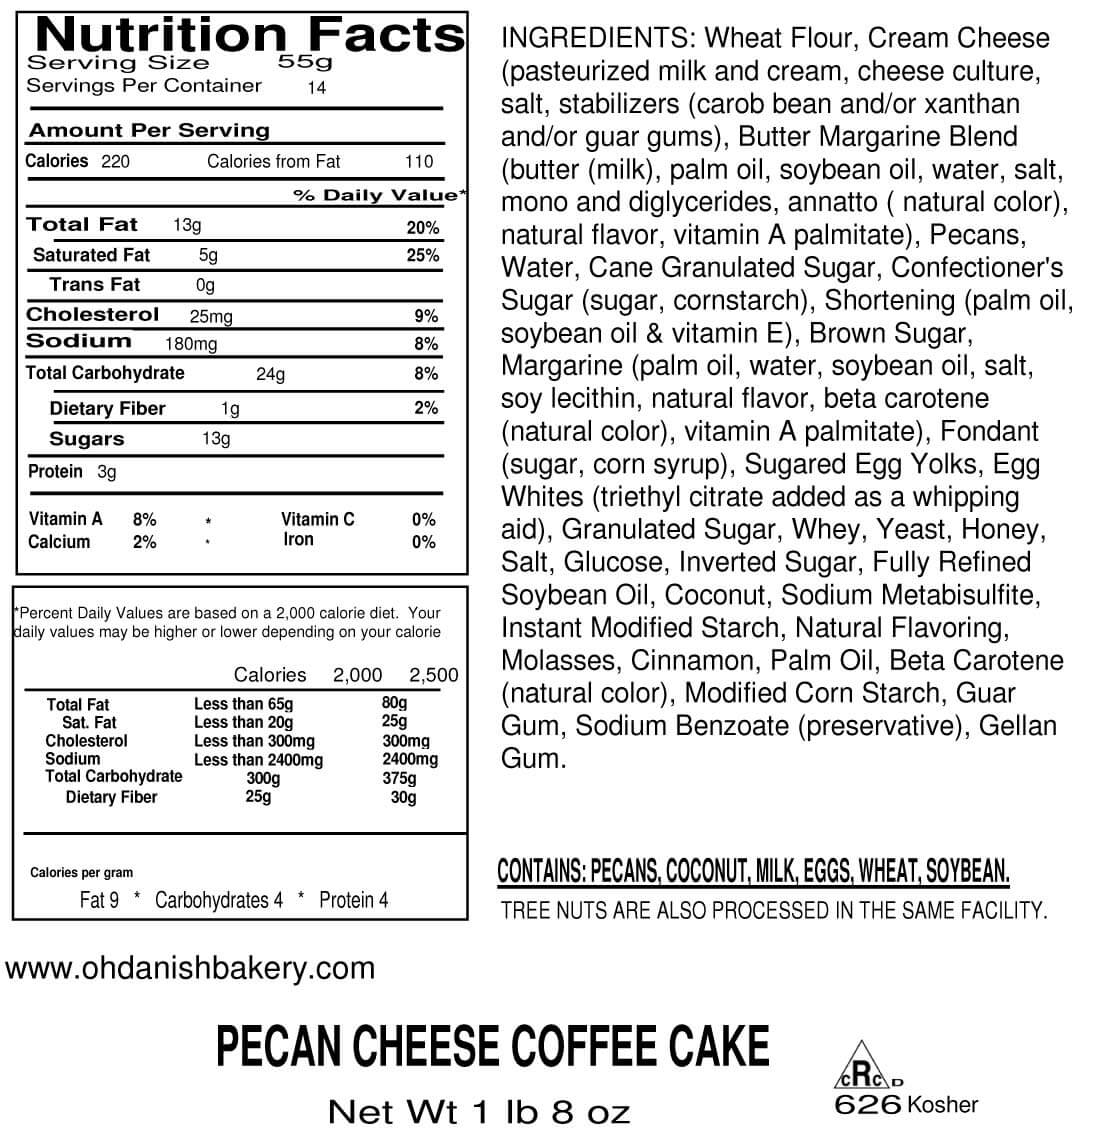 Nutritional Label for Pecan Cheese Coffee Cake